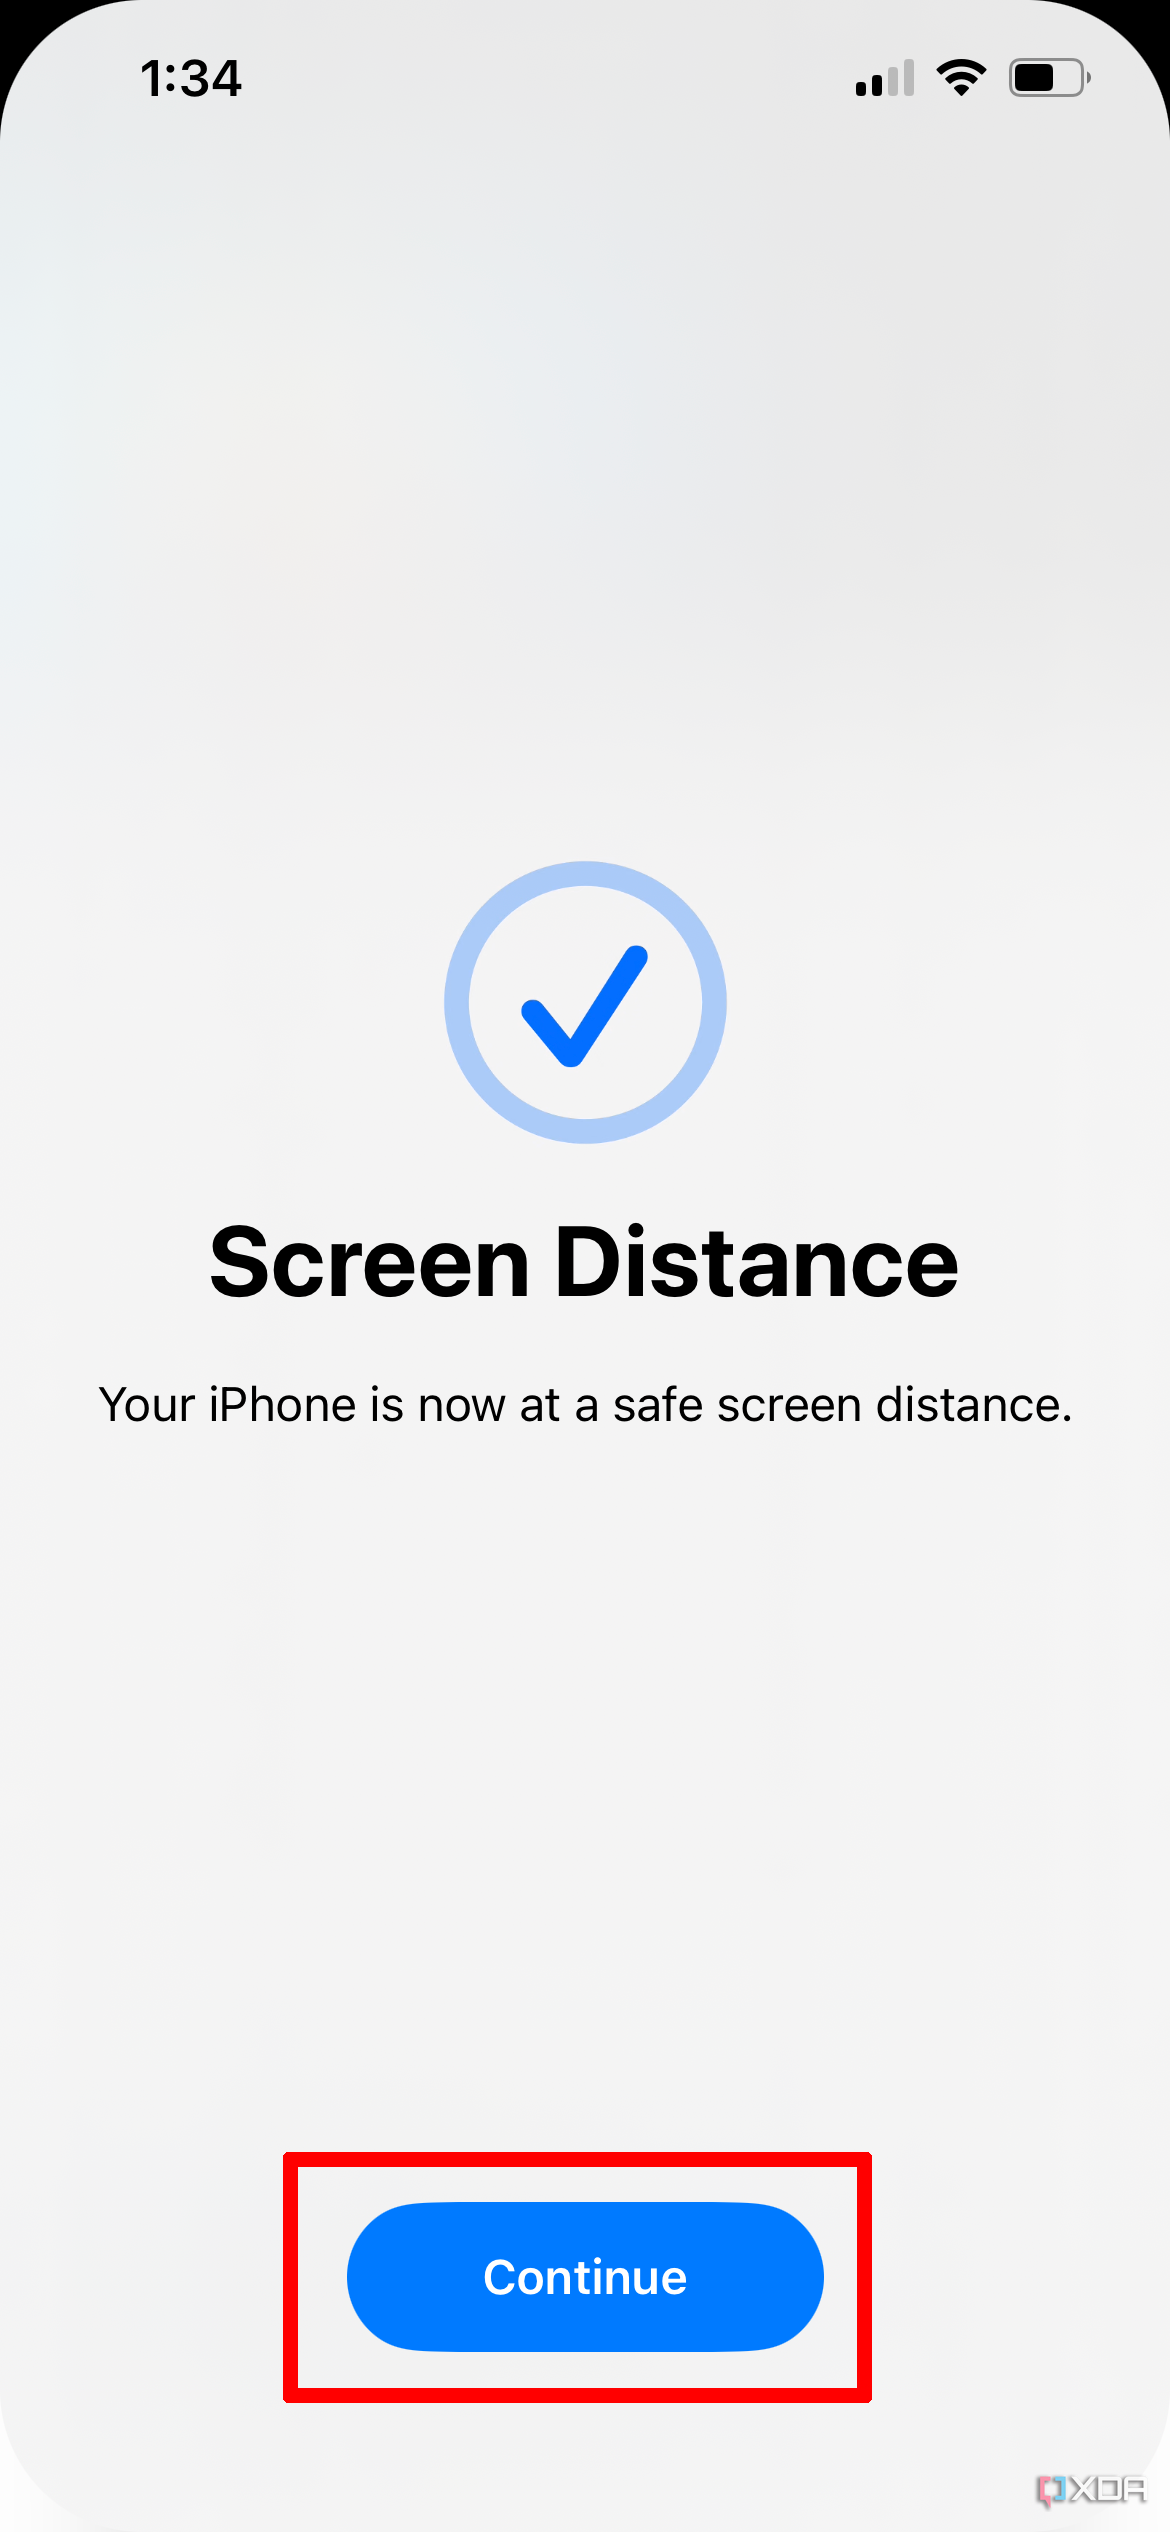 A check mark confirms that you have moved the iPhone far enough for the screen distance.